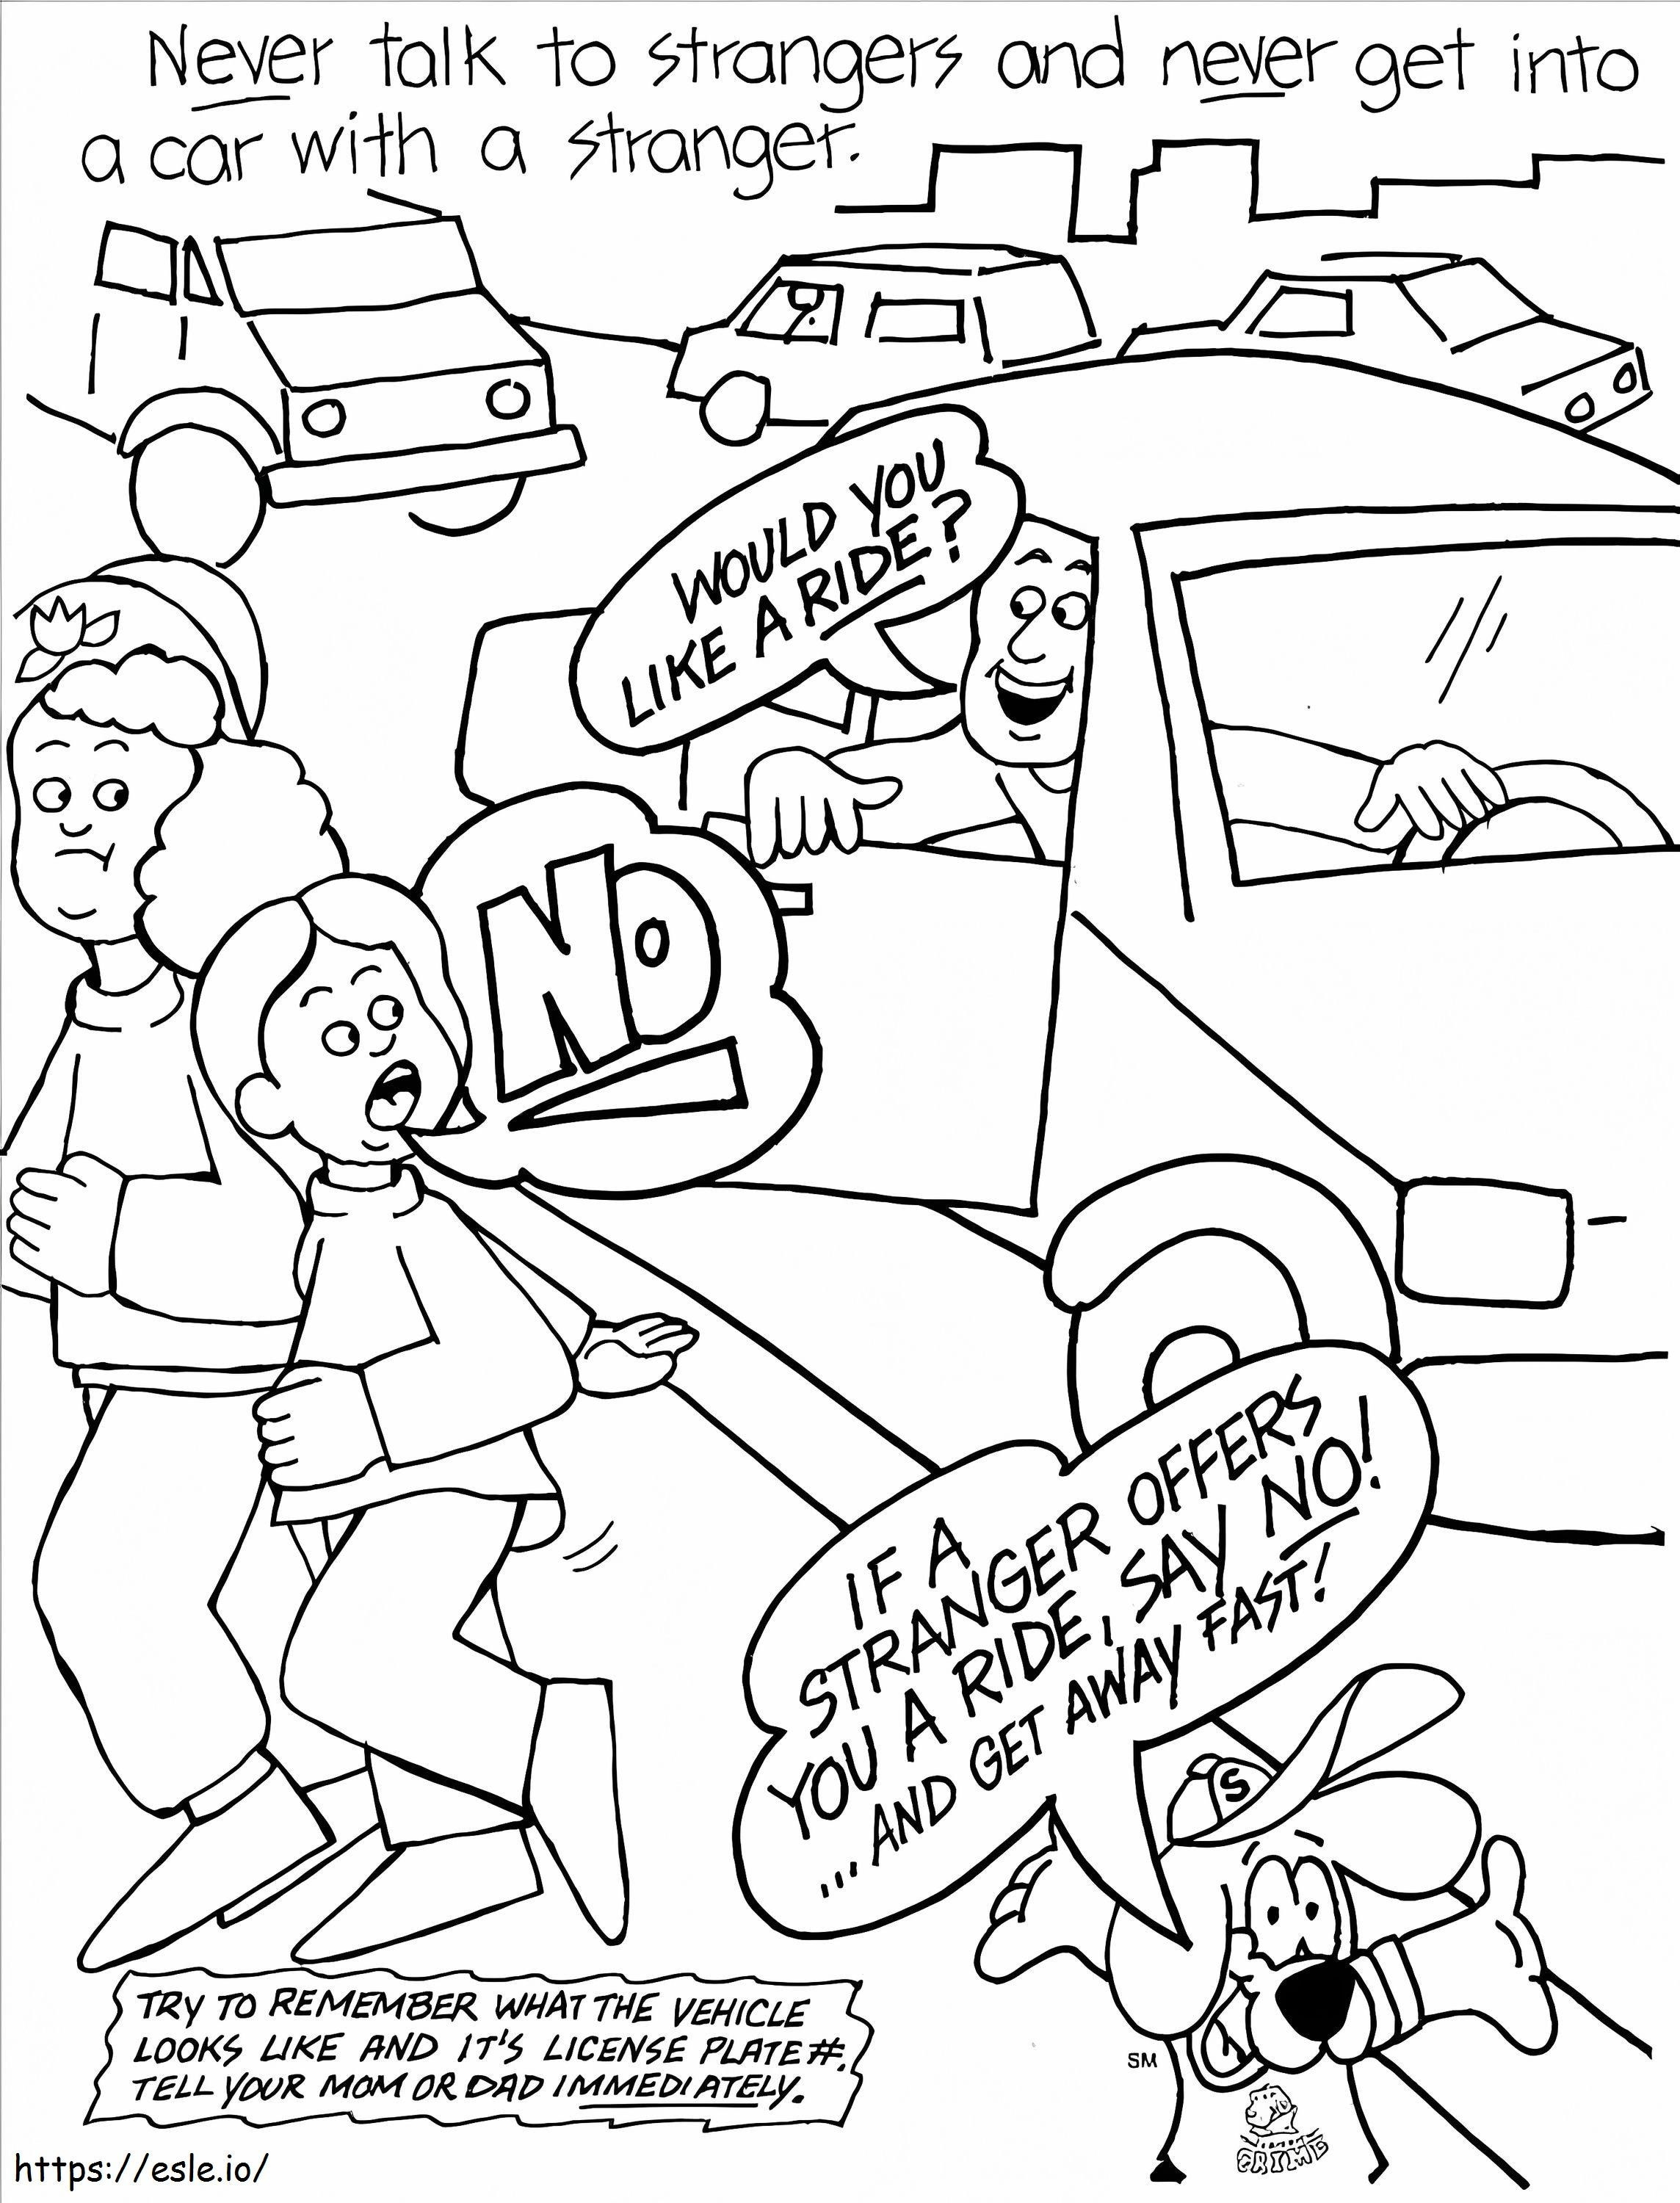 Child Safety 2 coloring page